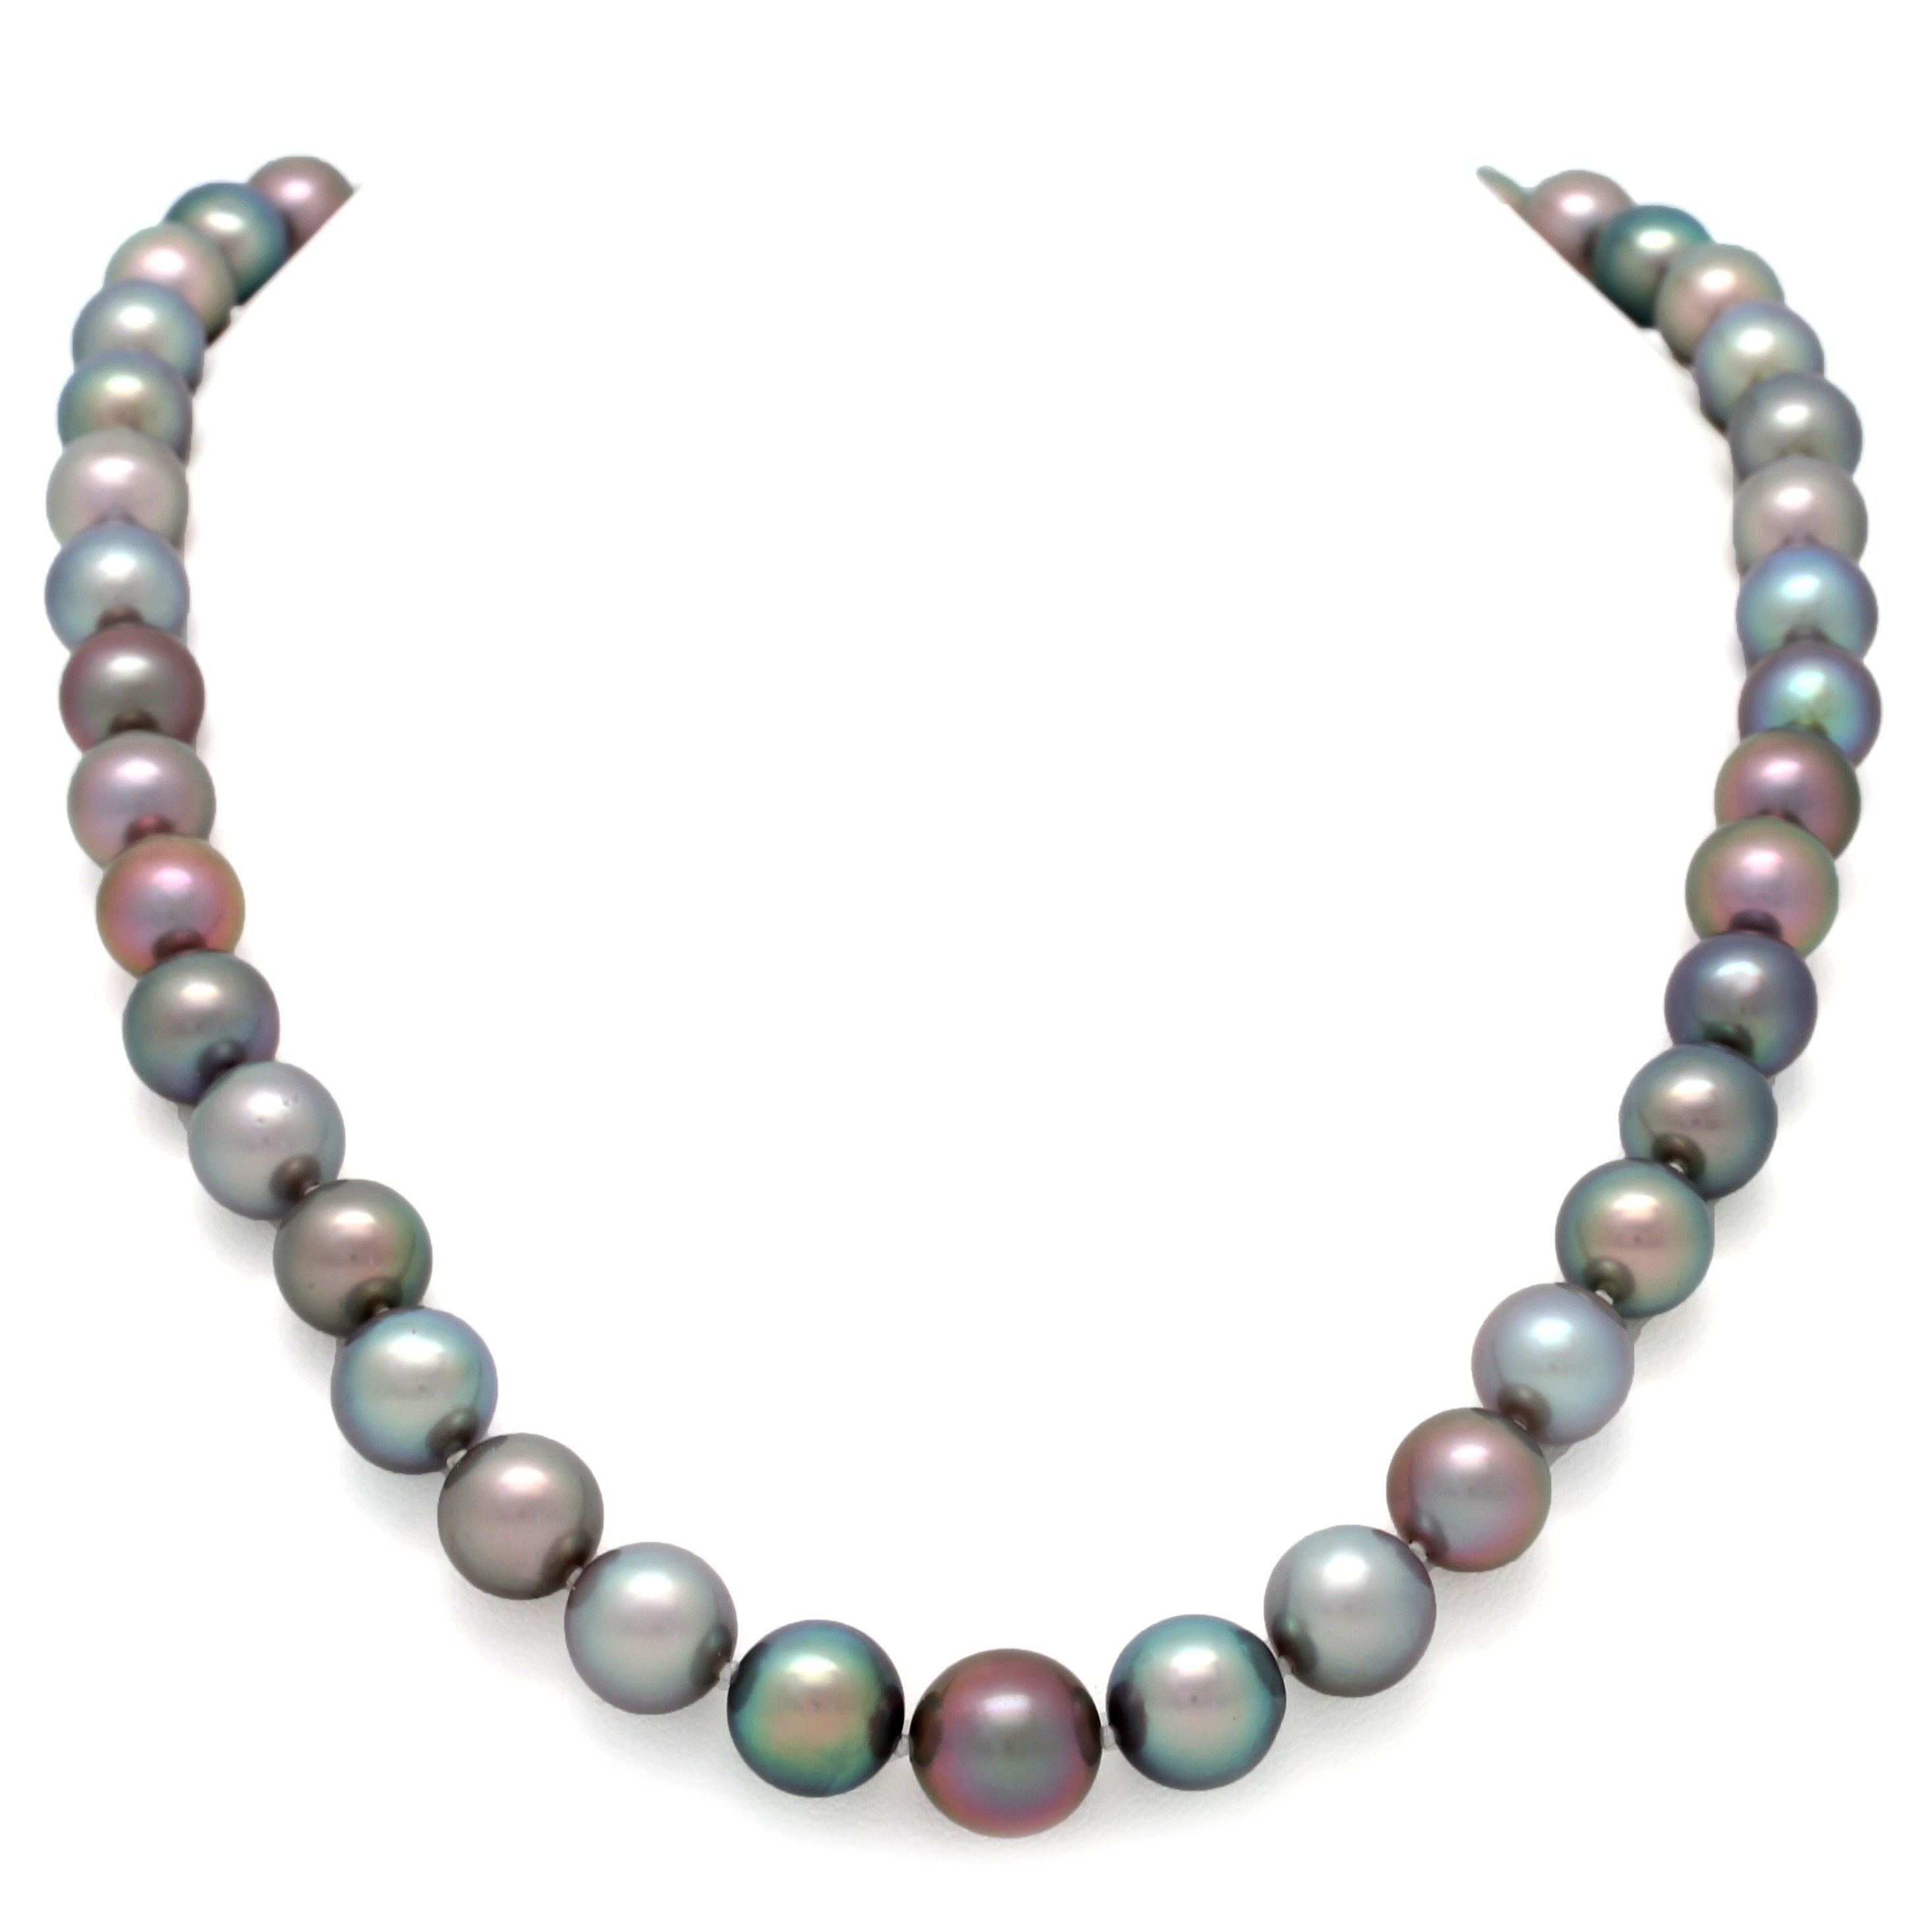 Make-Your-Own Cortez Pearl Necklace